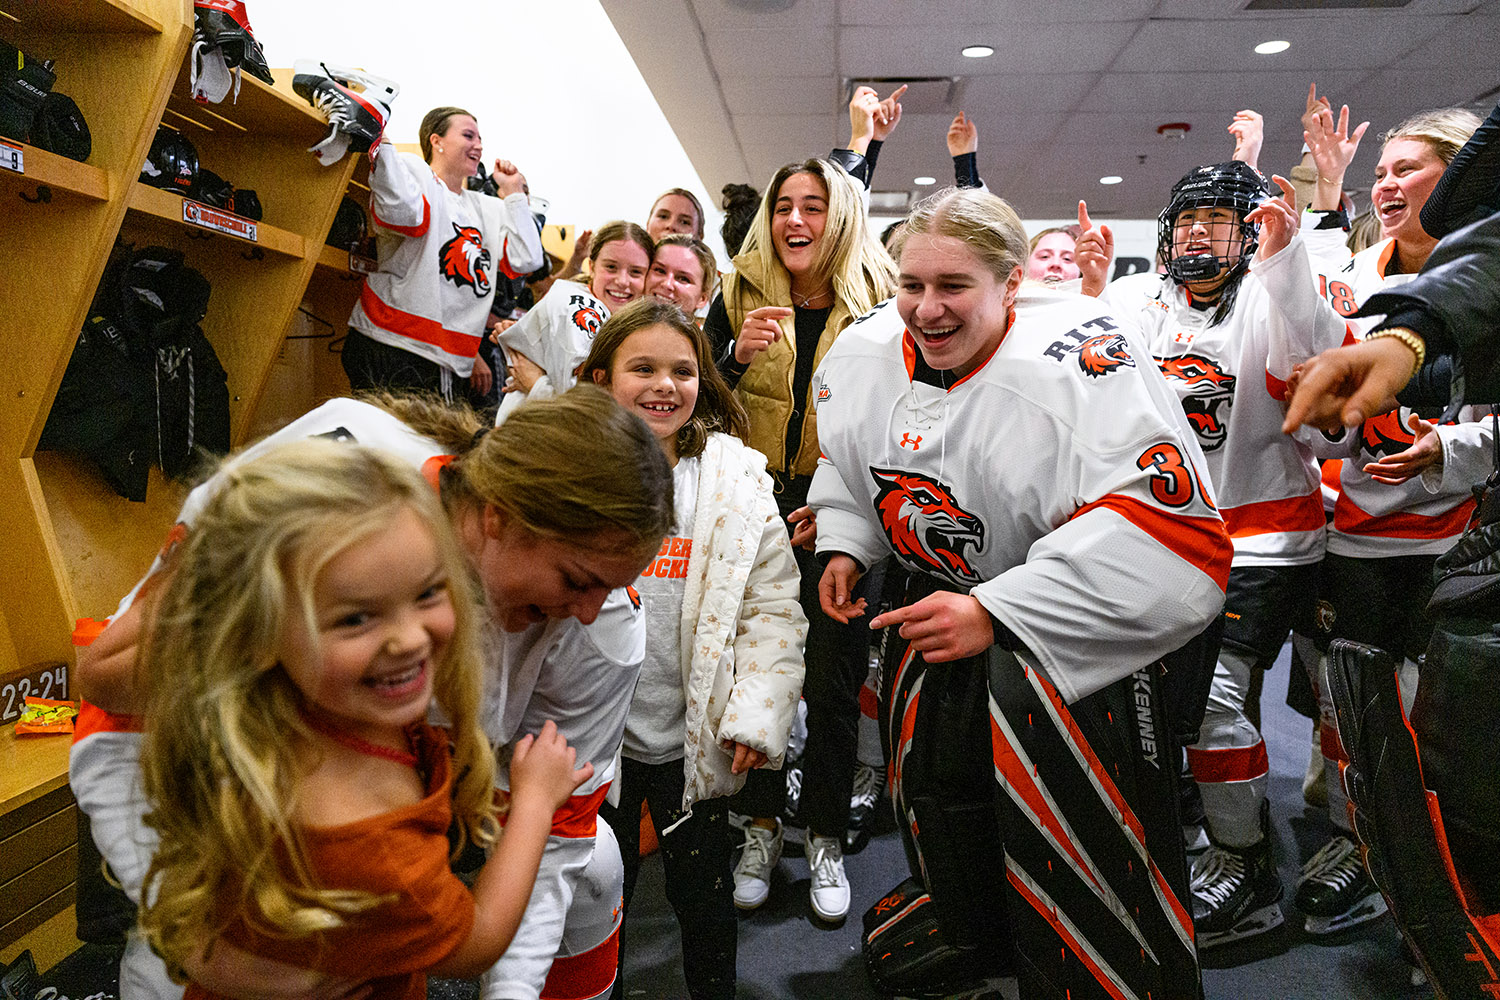 a color photograph of a women's ice hockey team in full uniforms in a locker room celebrating a win.